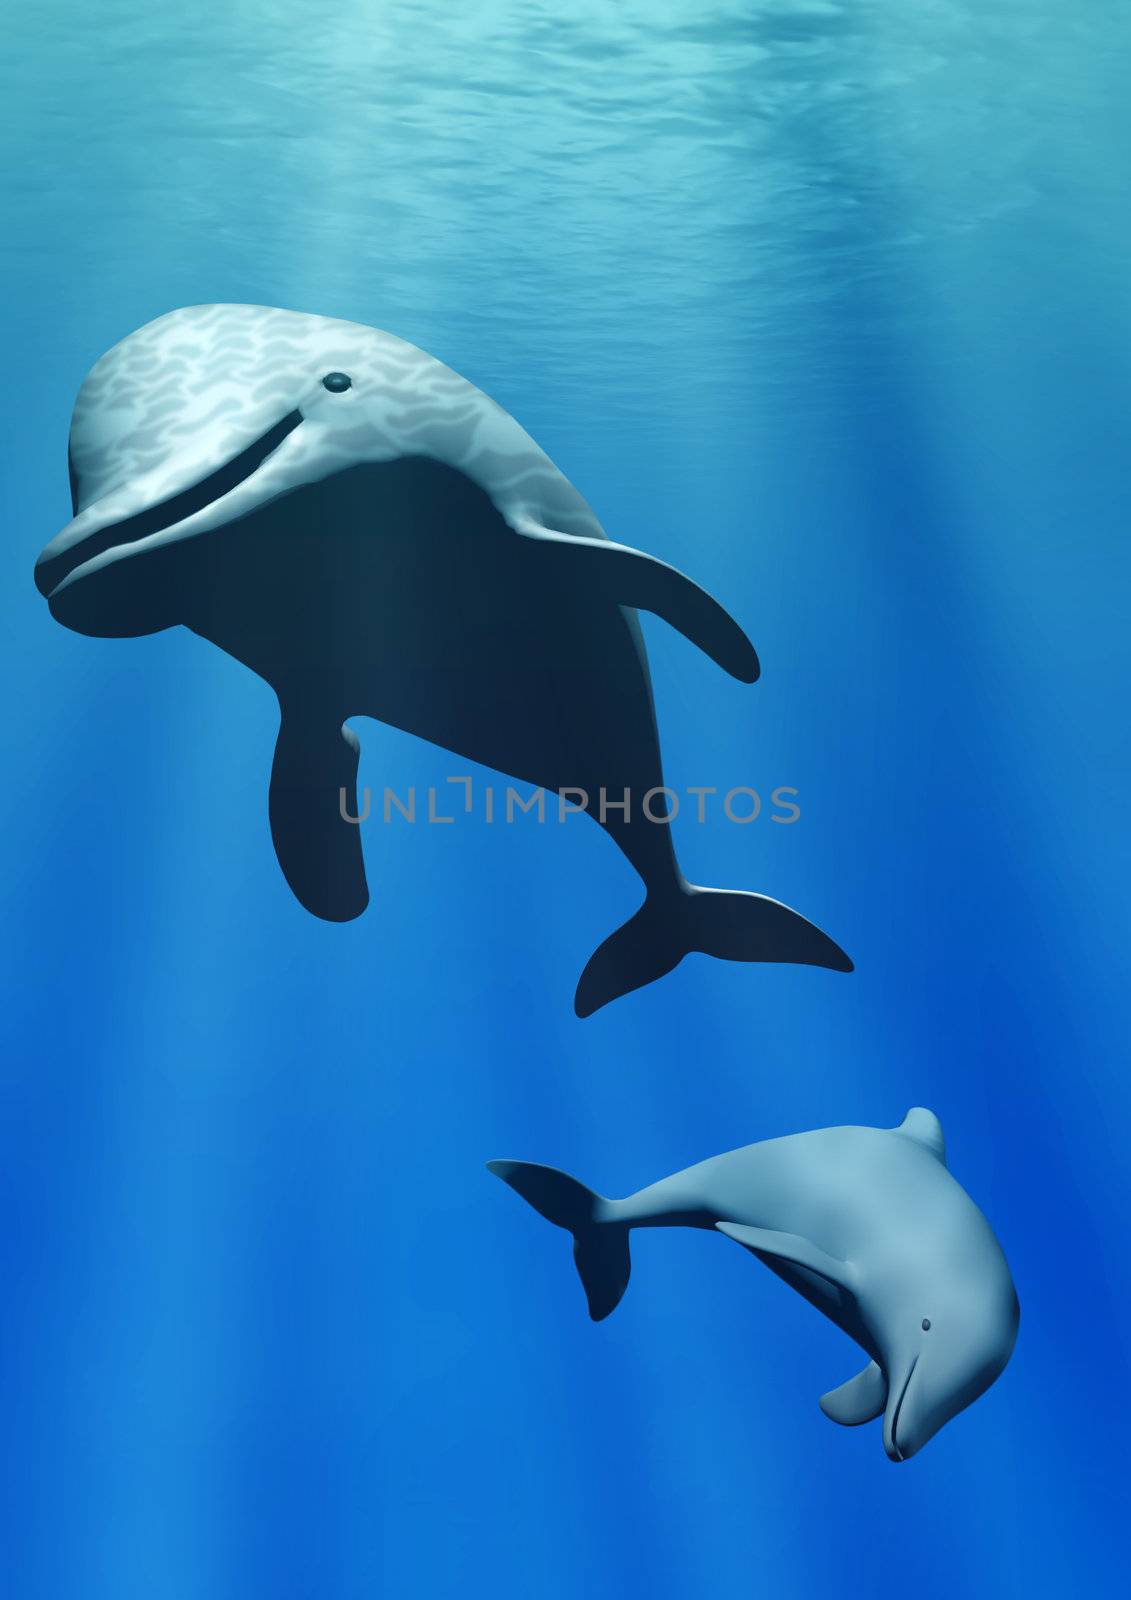 Dolphins under water. Two sea animals in blue water with effect of beams of the sun